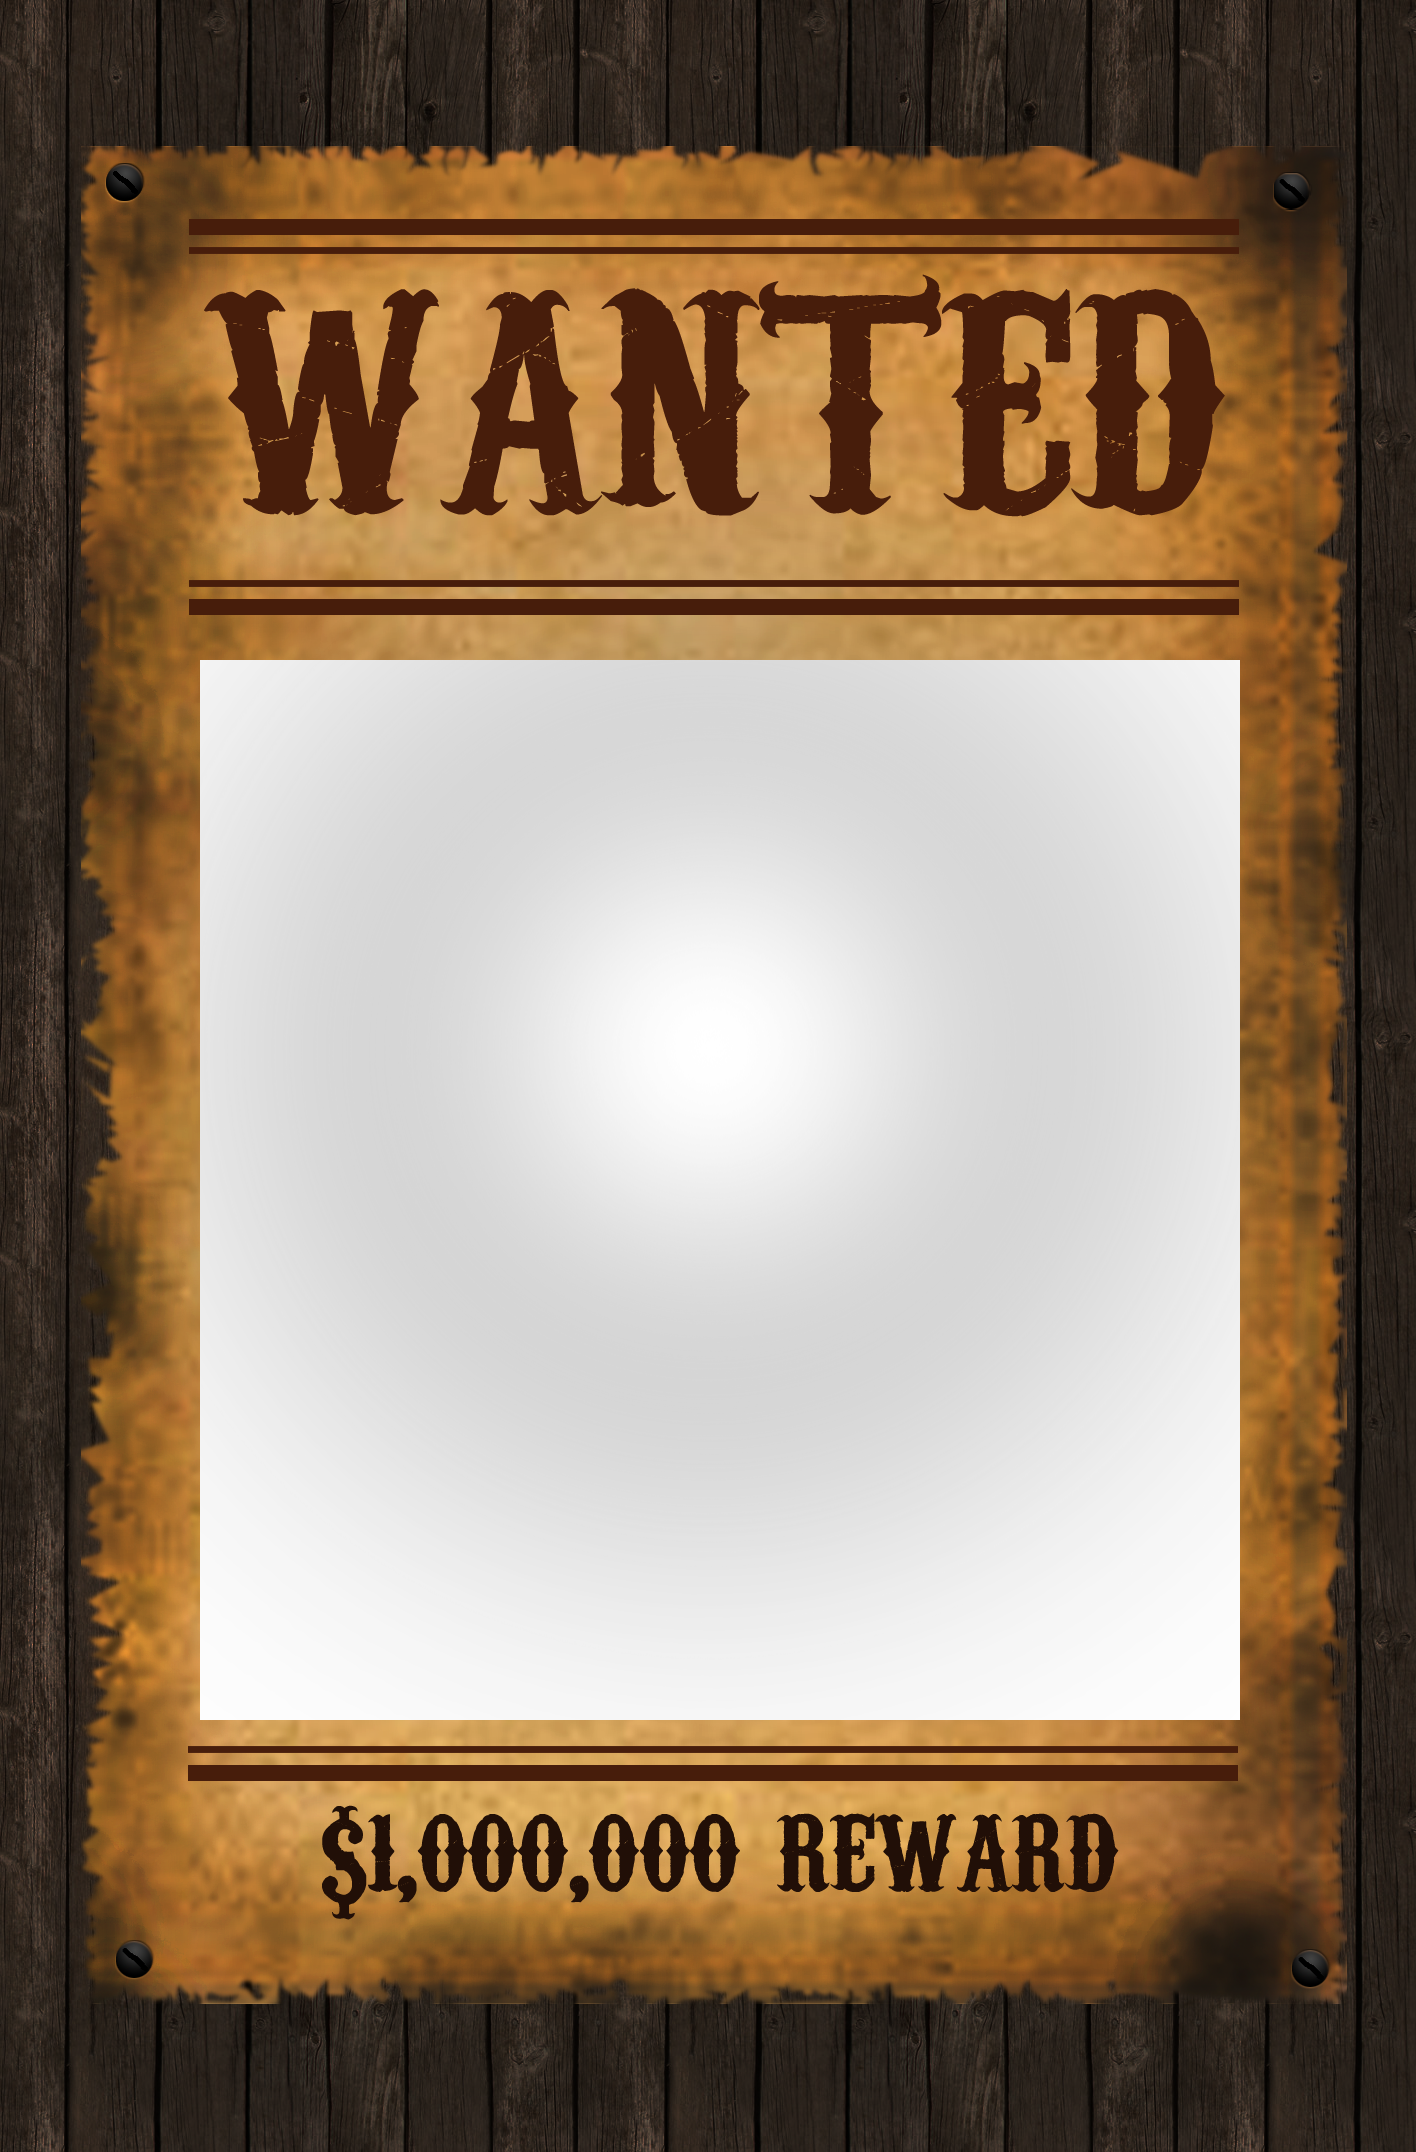 Wanted Images - Free Download on Freepik